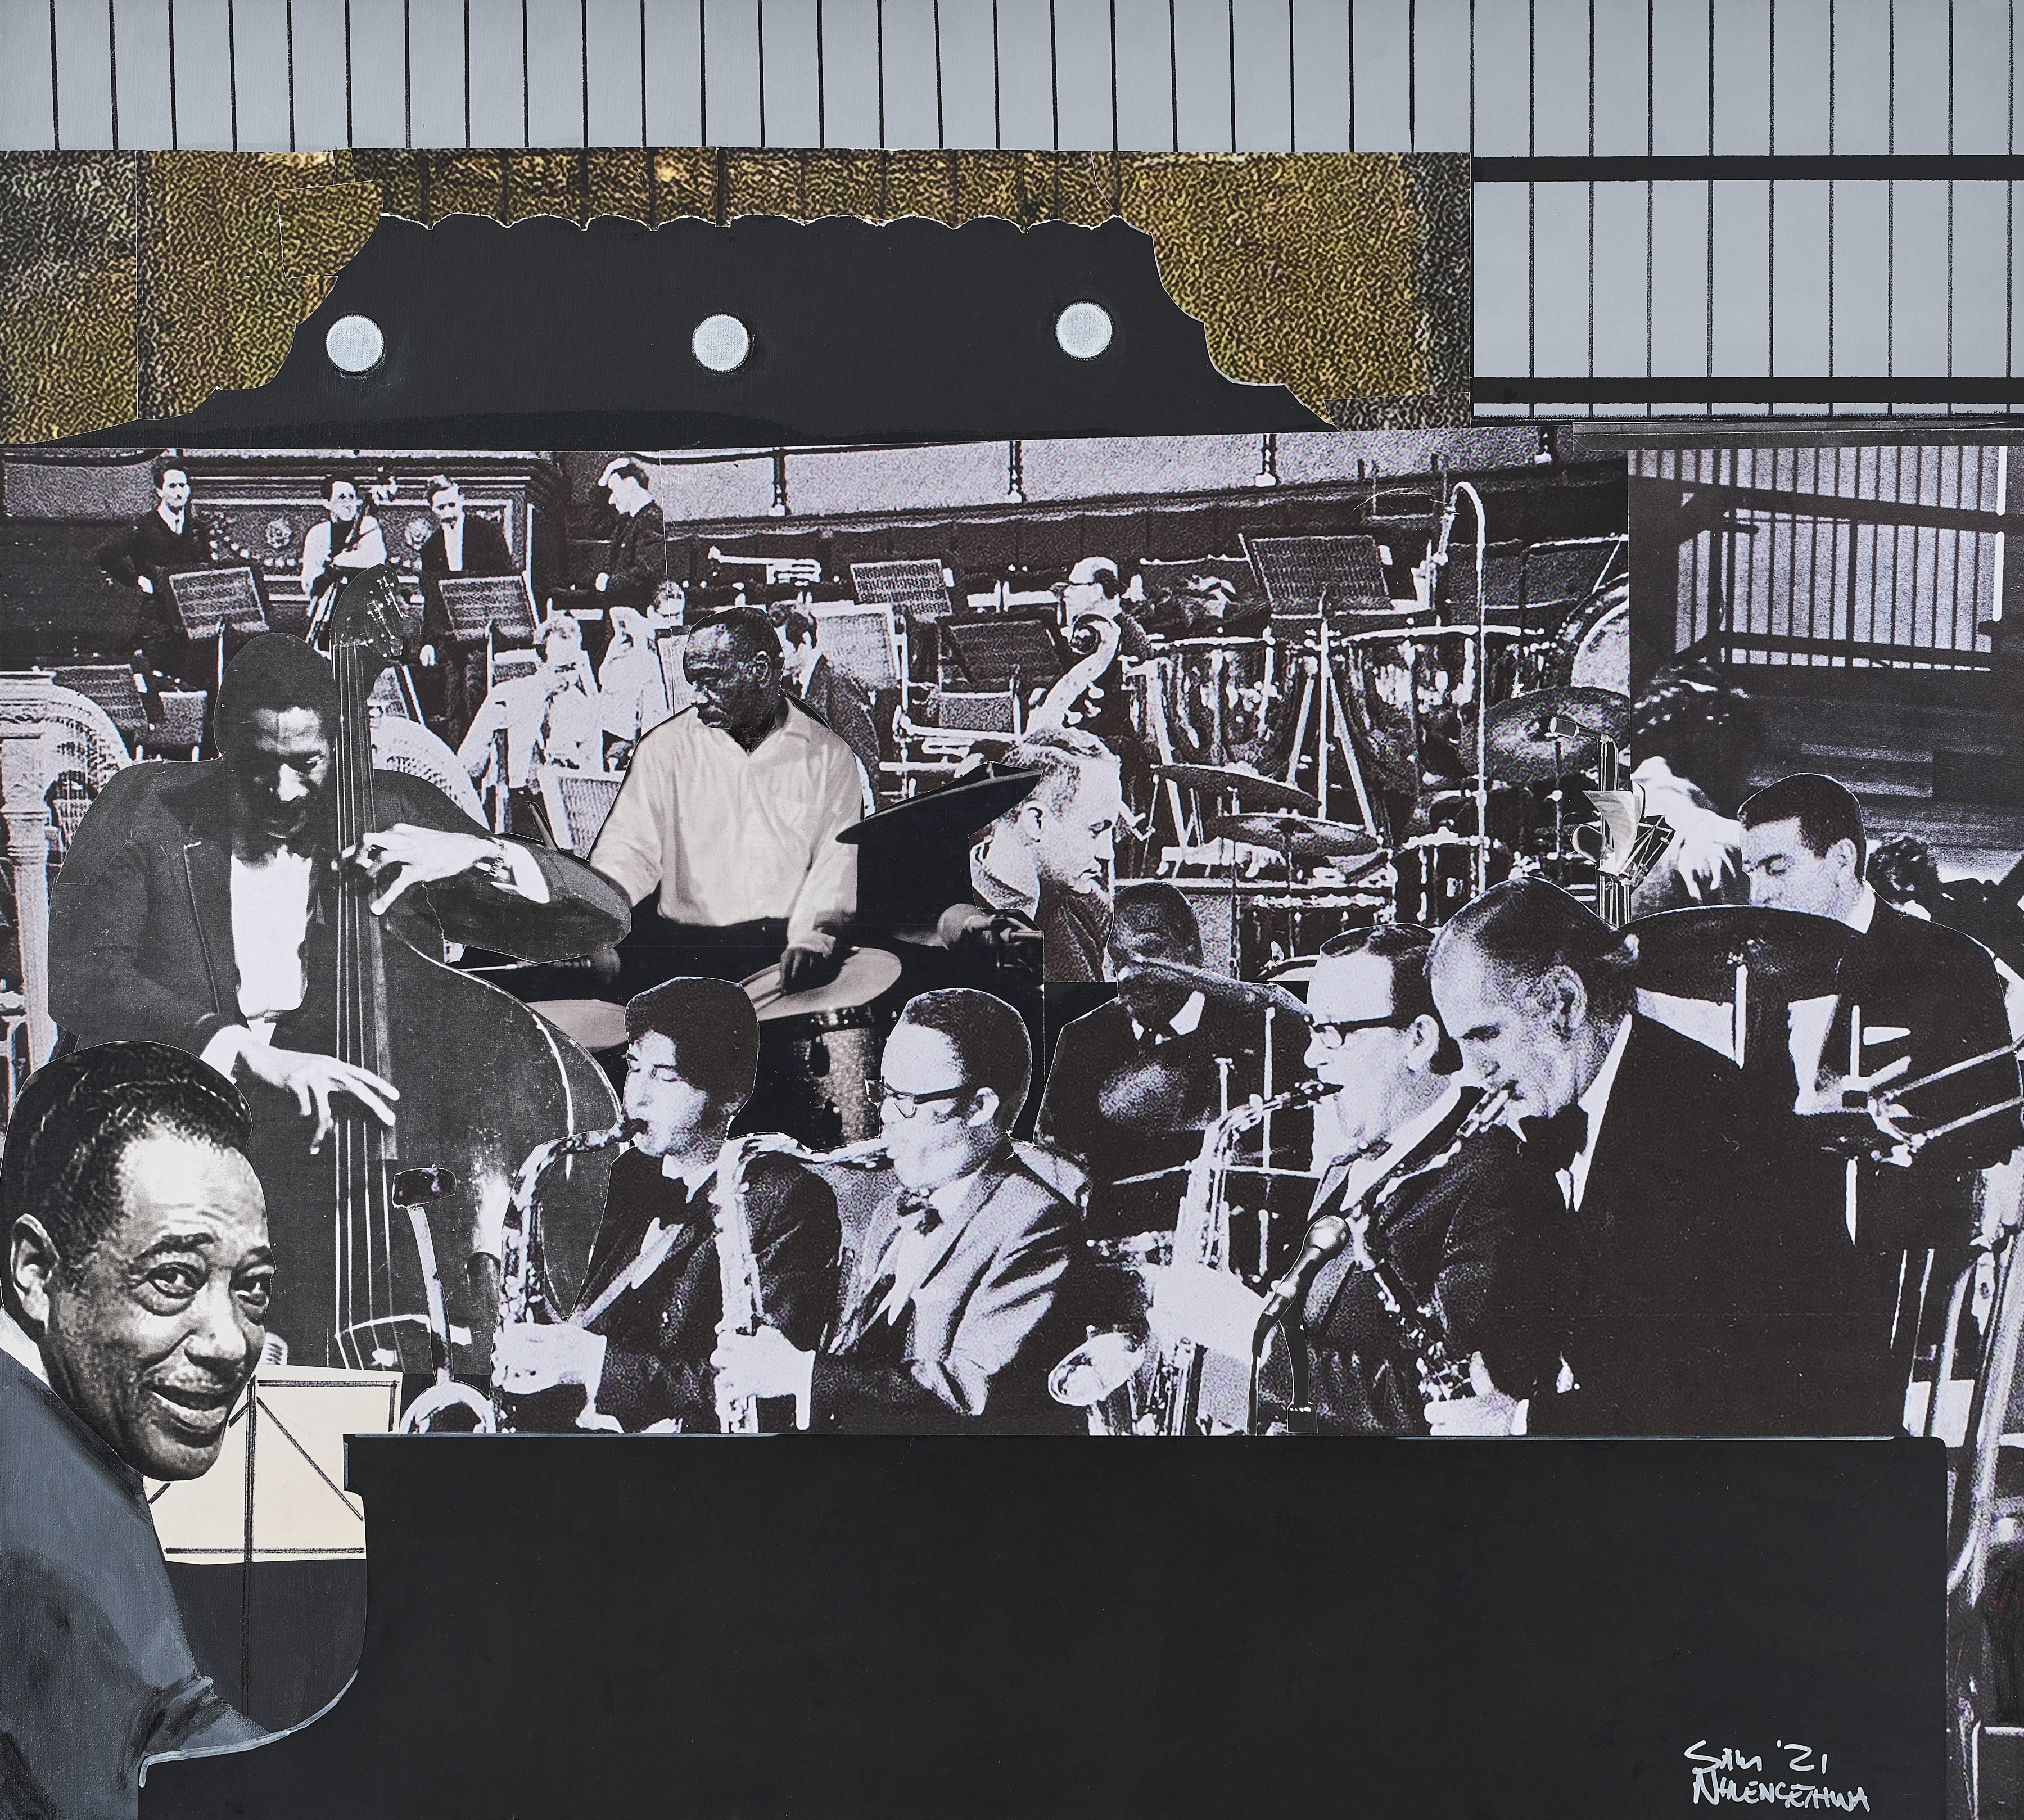 Duke Ellington and his band,&amp;nbsp;2021
Mixed media collage on canvas
90.2 x 100 x 9.8 cm
Enquire